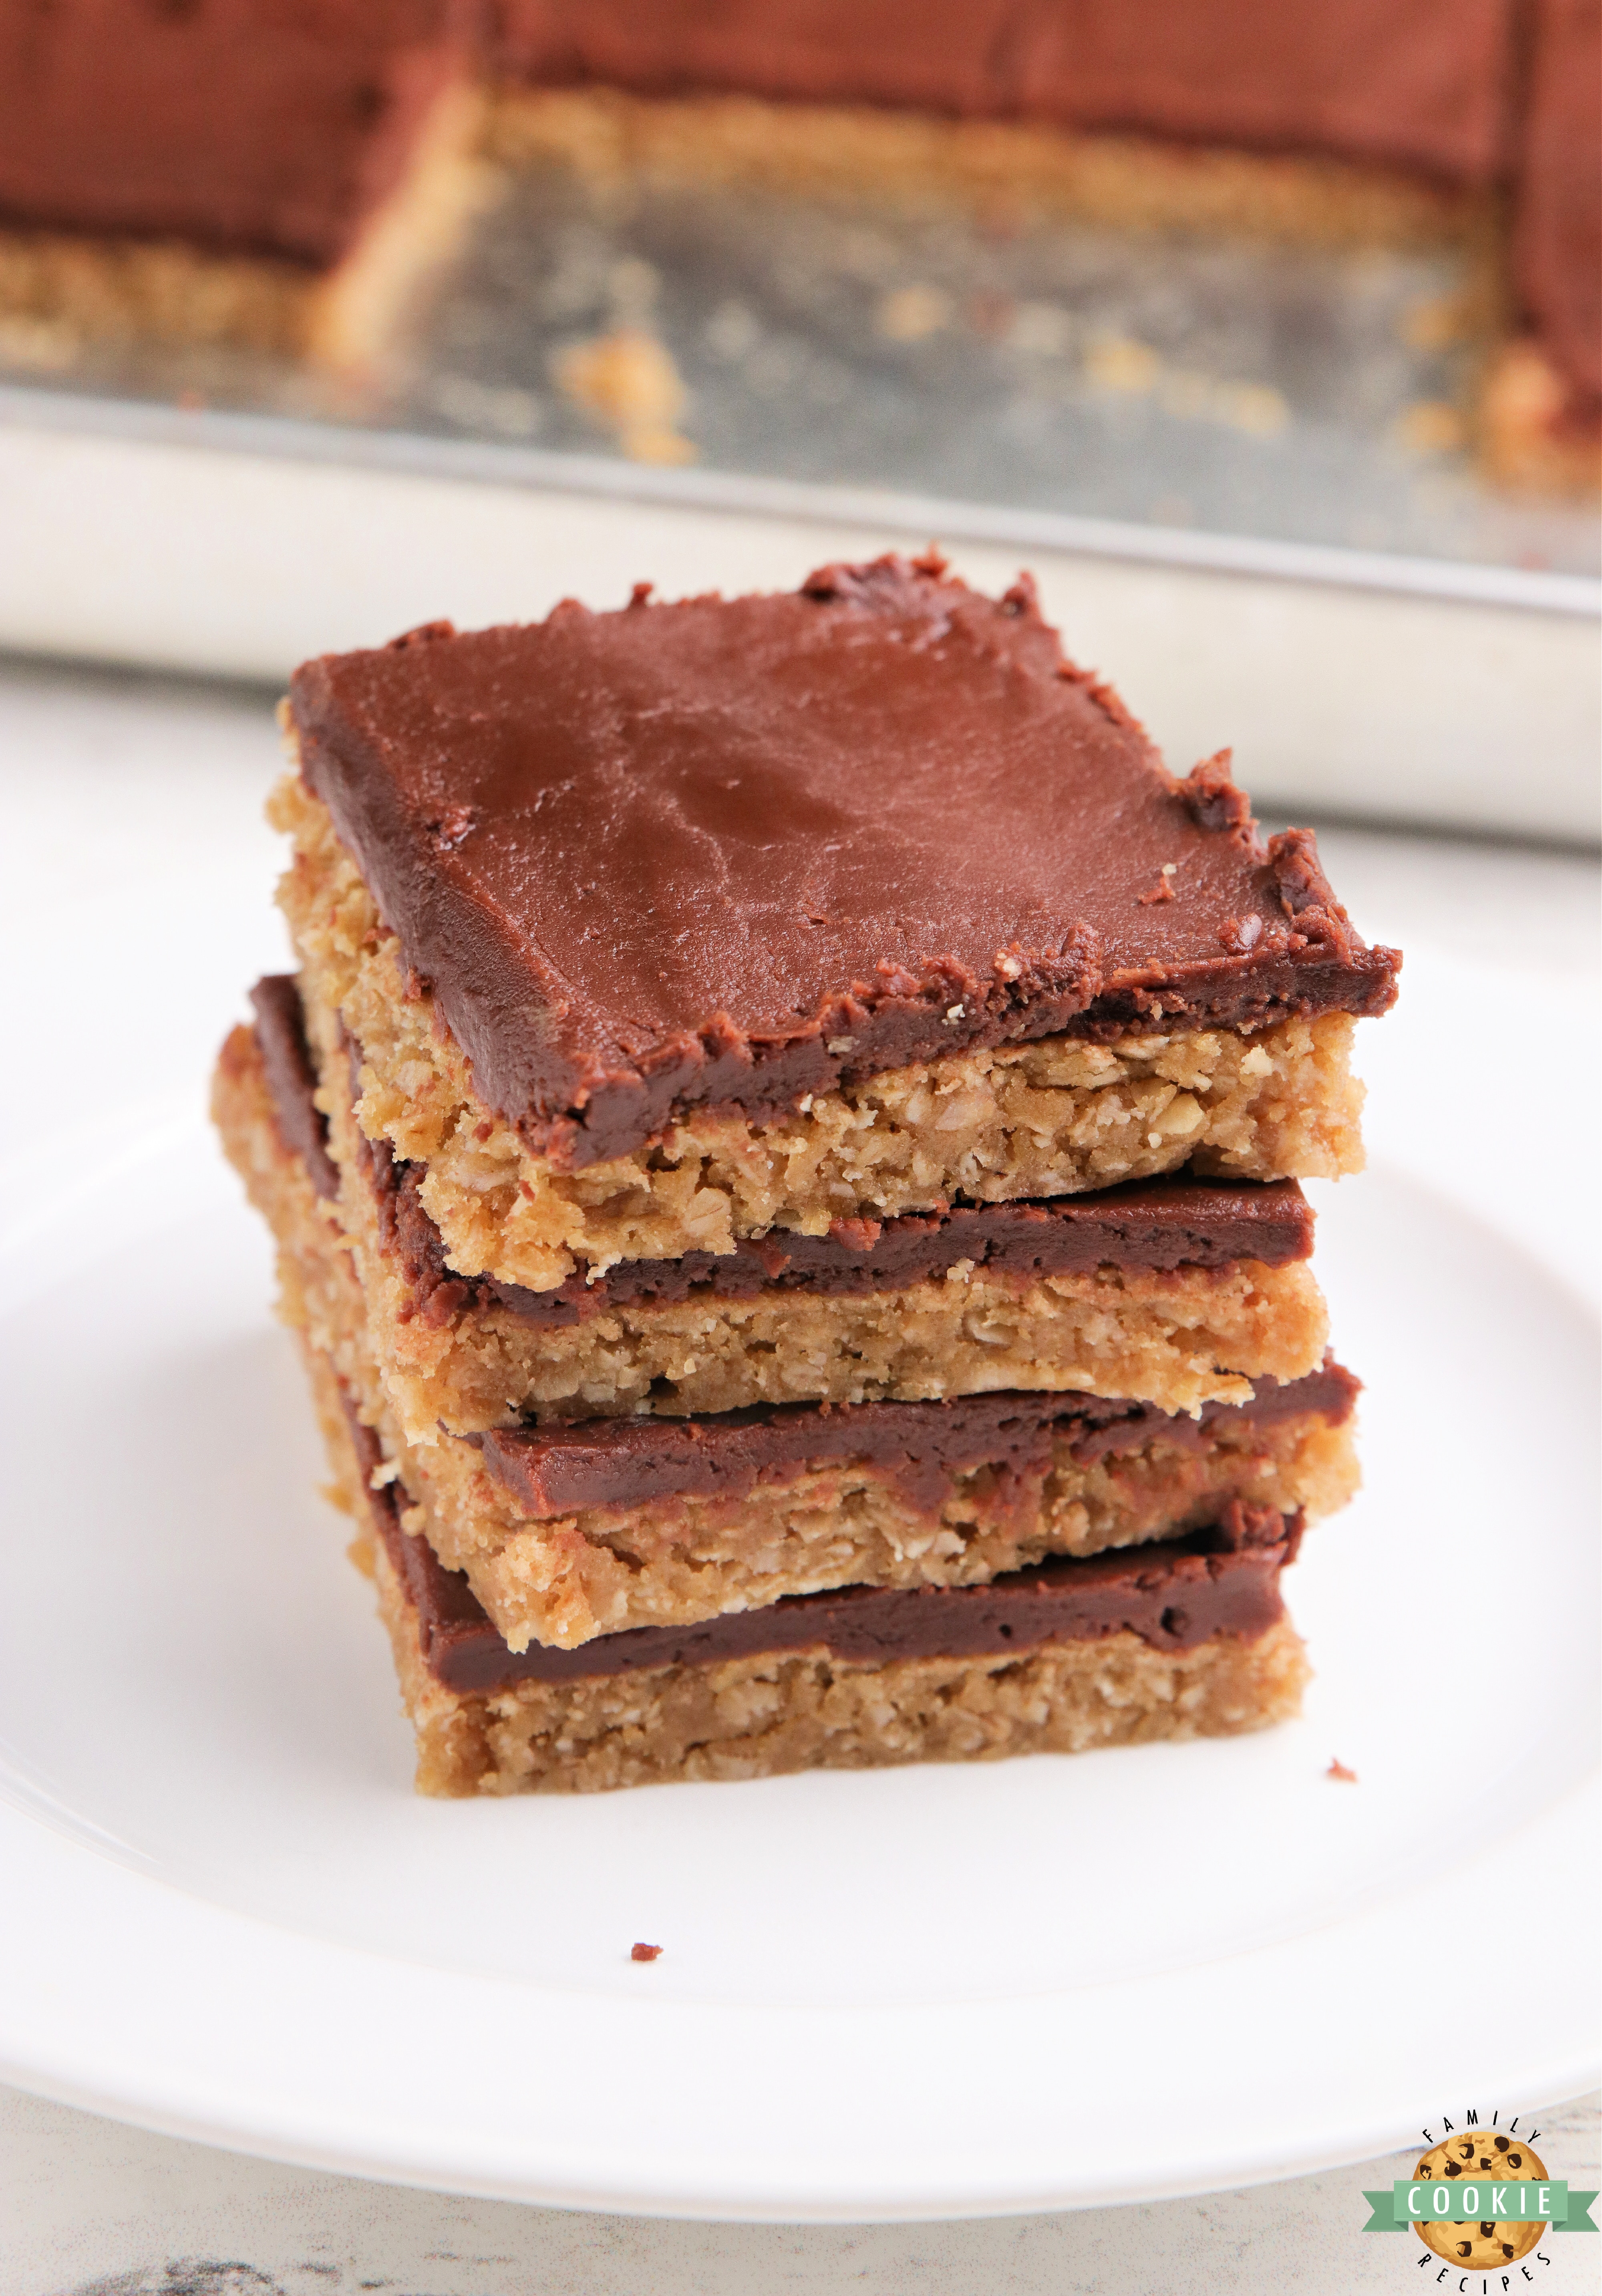 Peanut Butter Cookie Bars are soft and chewy with a chocolate fudge frosting on top. Delicious cookie bar recipe made with peanut butter, oats and a simple chocolate ganache for the frosting!